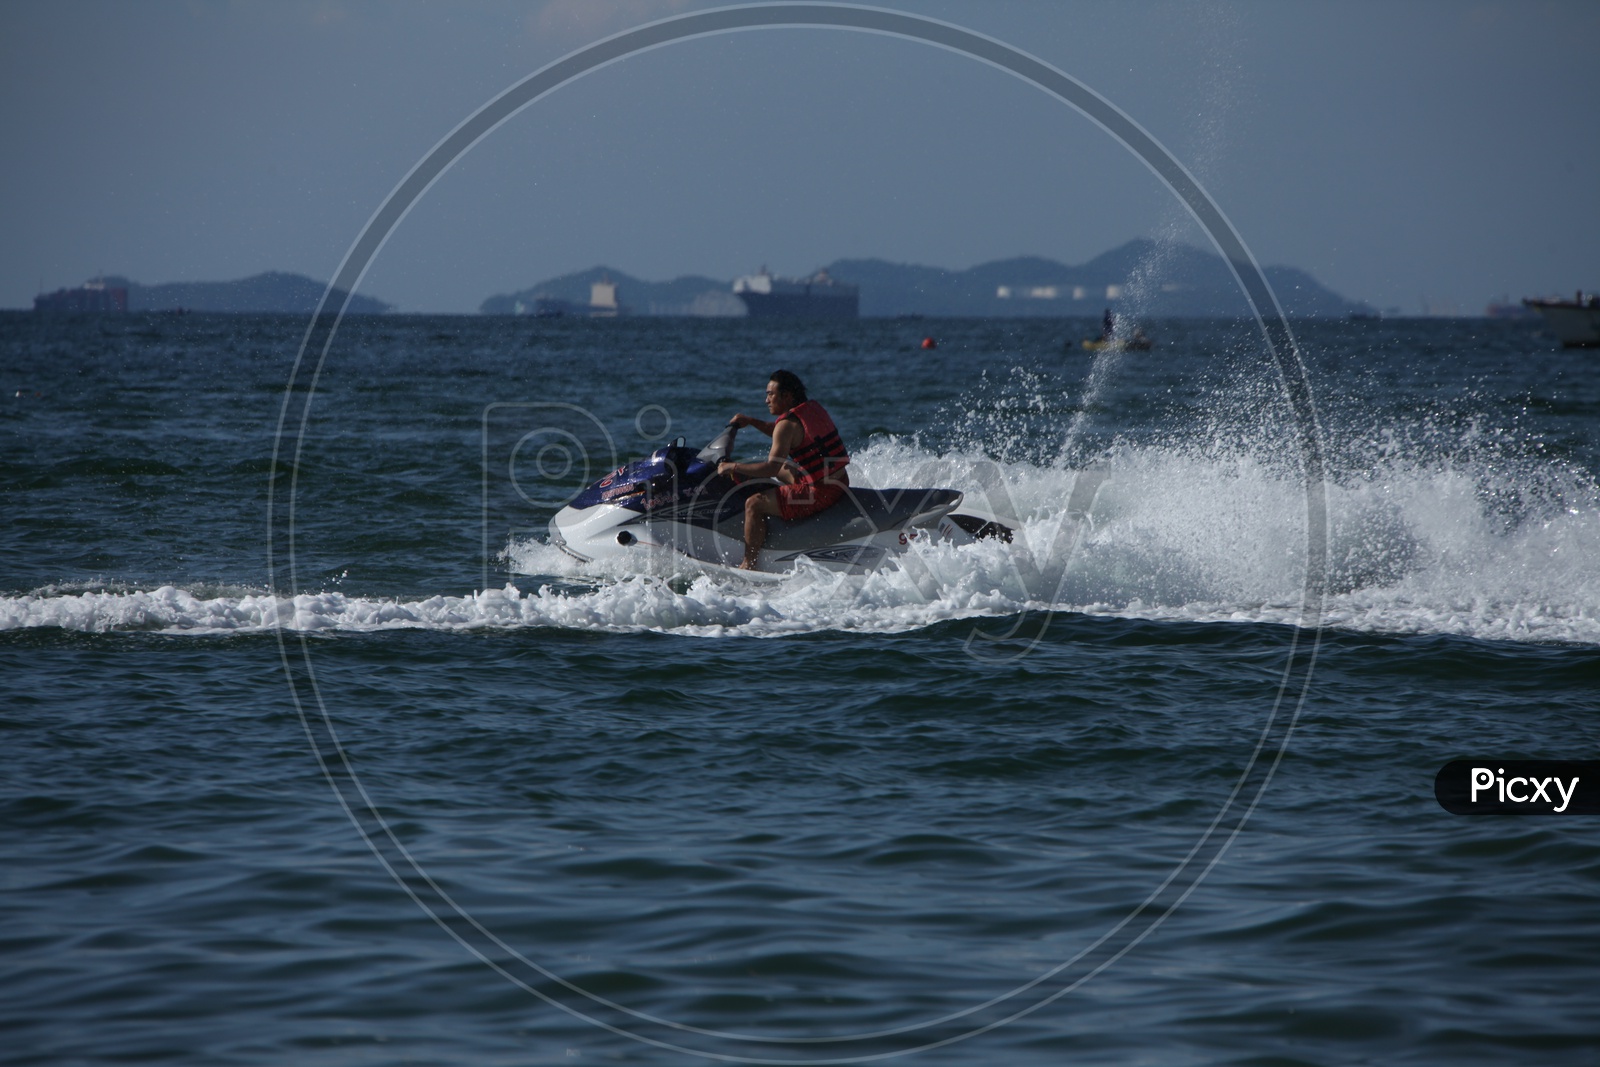 A man surfing with a Speed Boat on the Sea